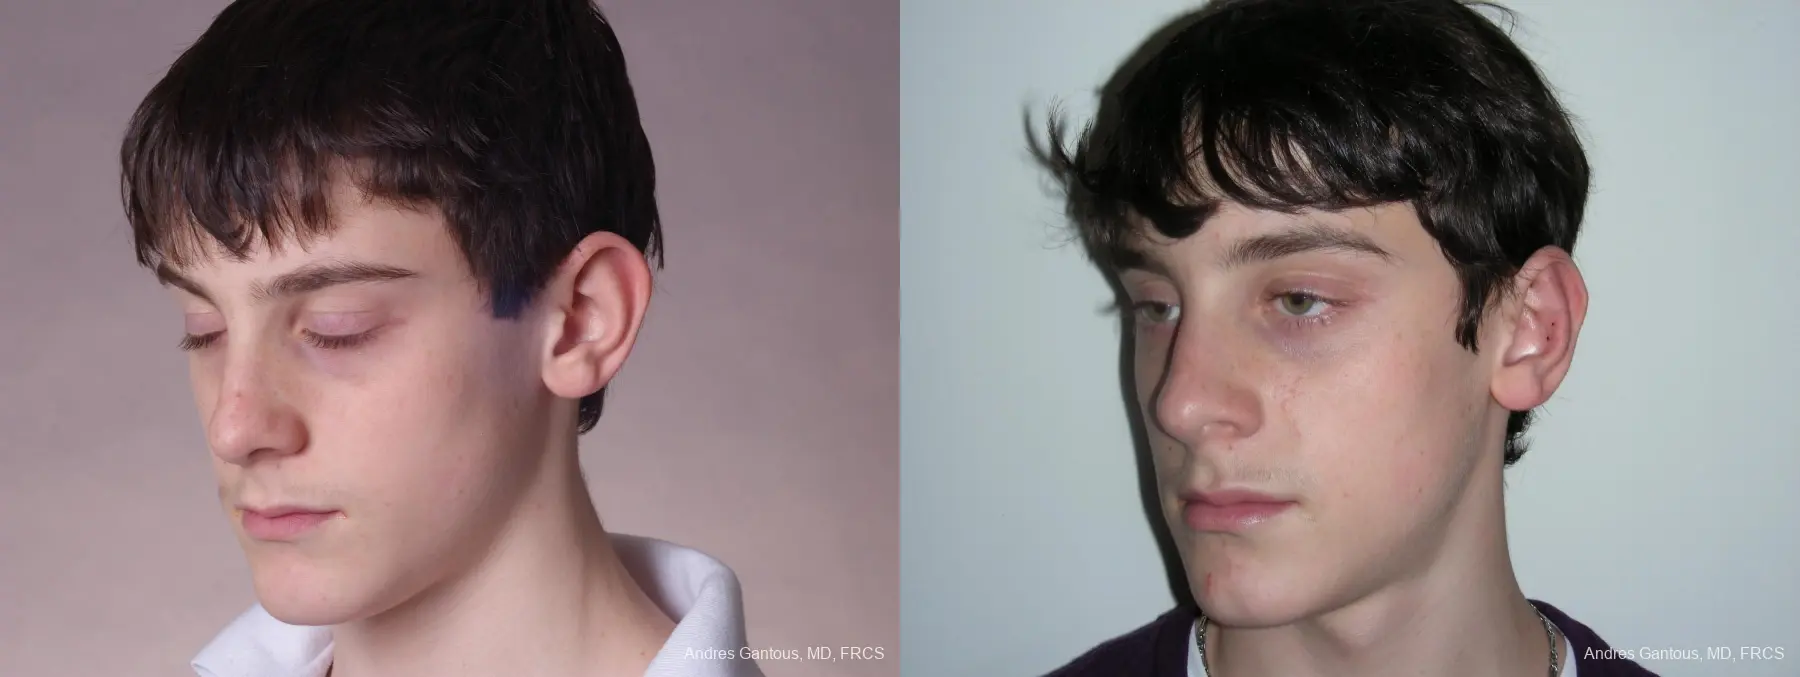 Otoplasty And Earlobe Repair: Patient 3 - Before and After 4